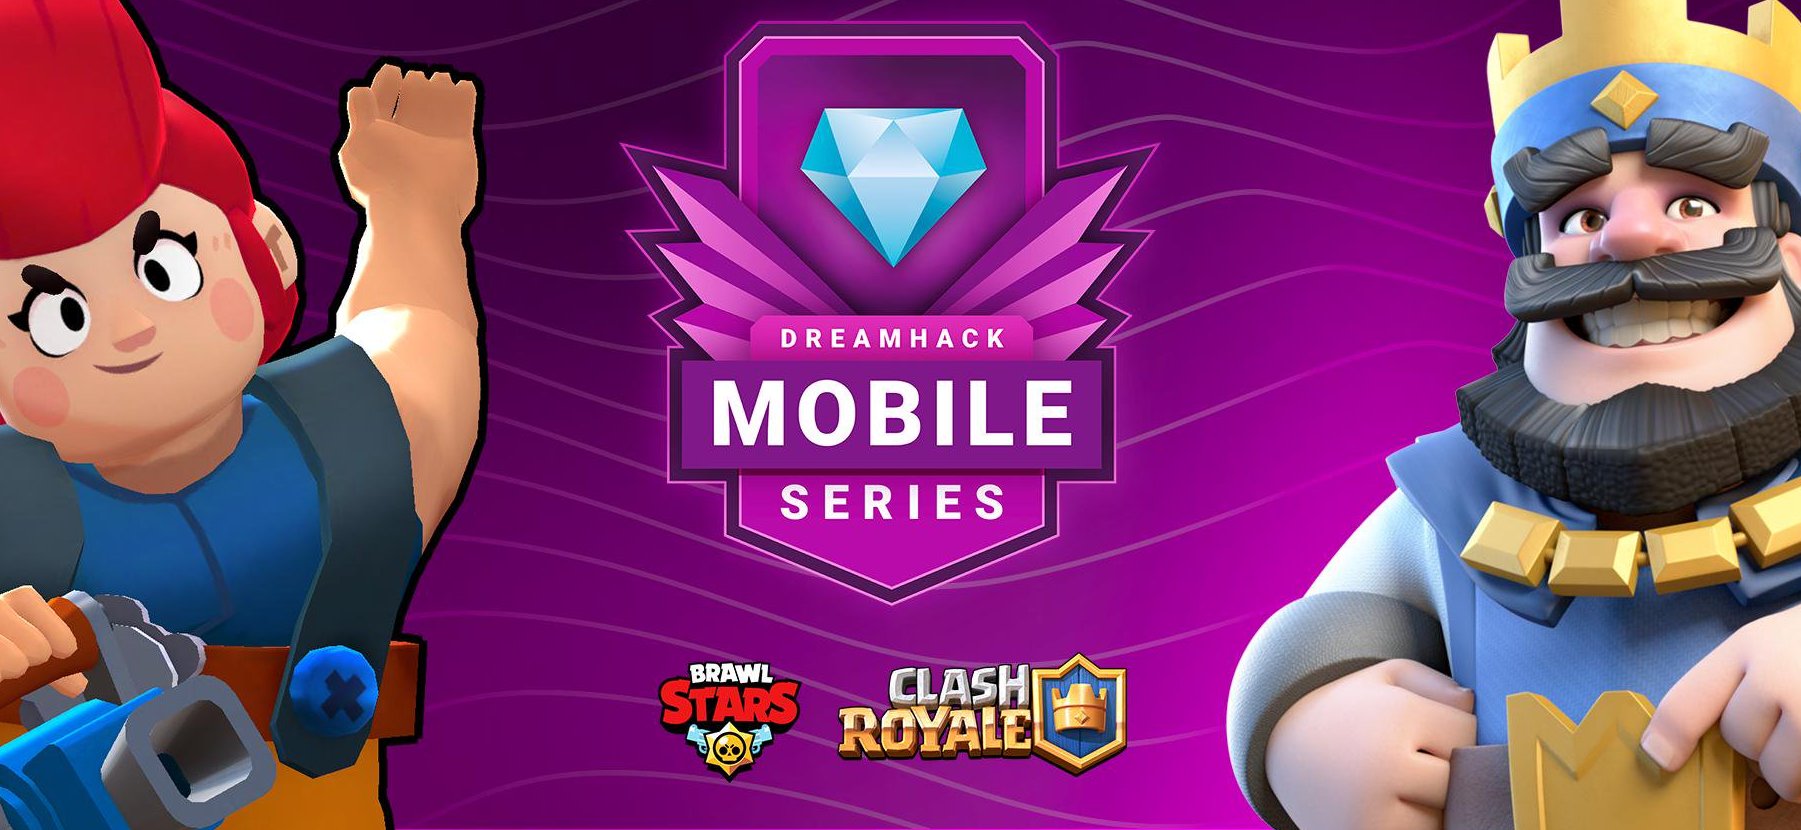 Samsung Partners With Mobile Series At Dreamhack Summer 2019 Dot Esports - brawl stars clash royale fan art